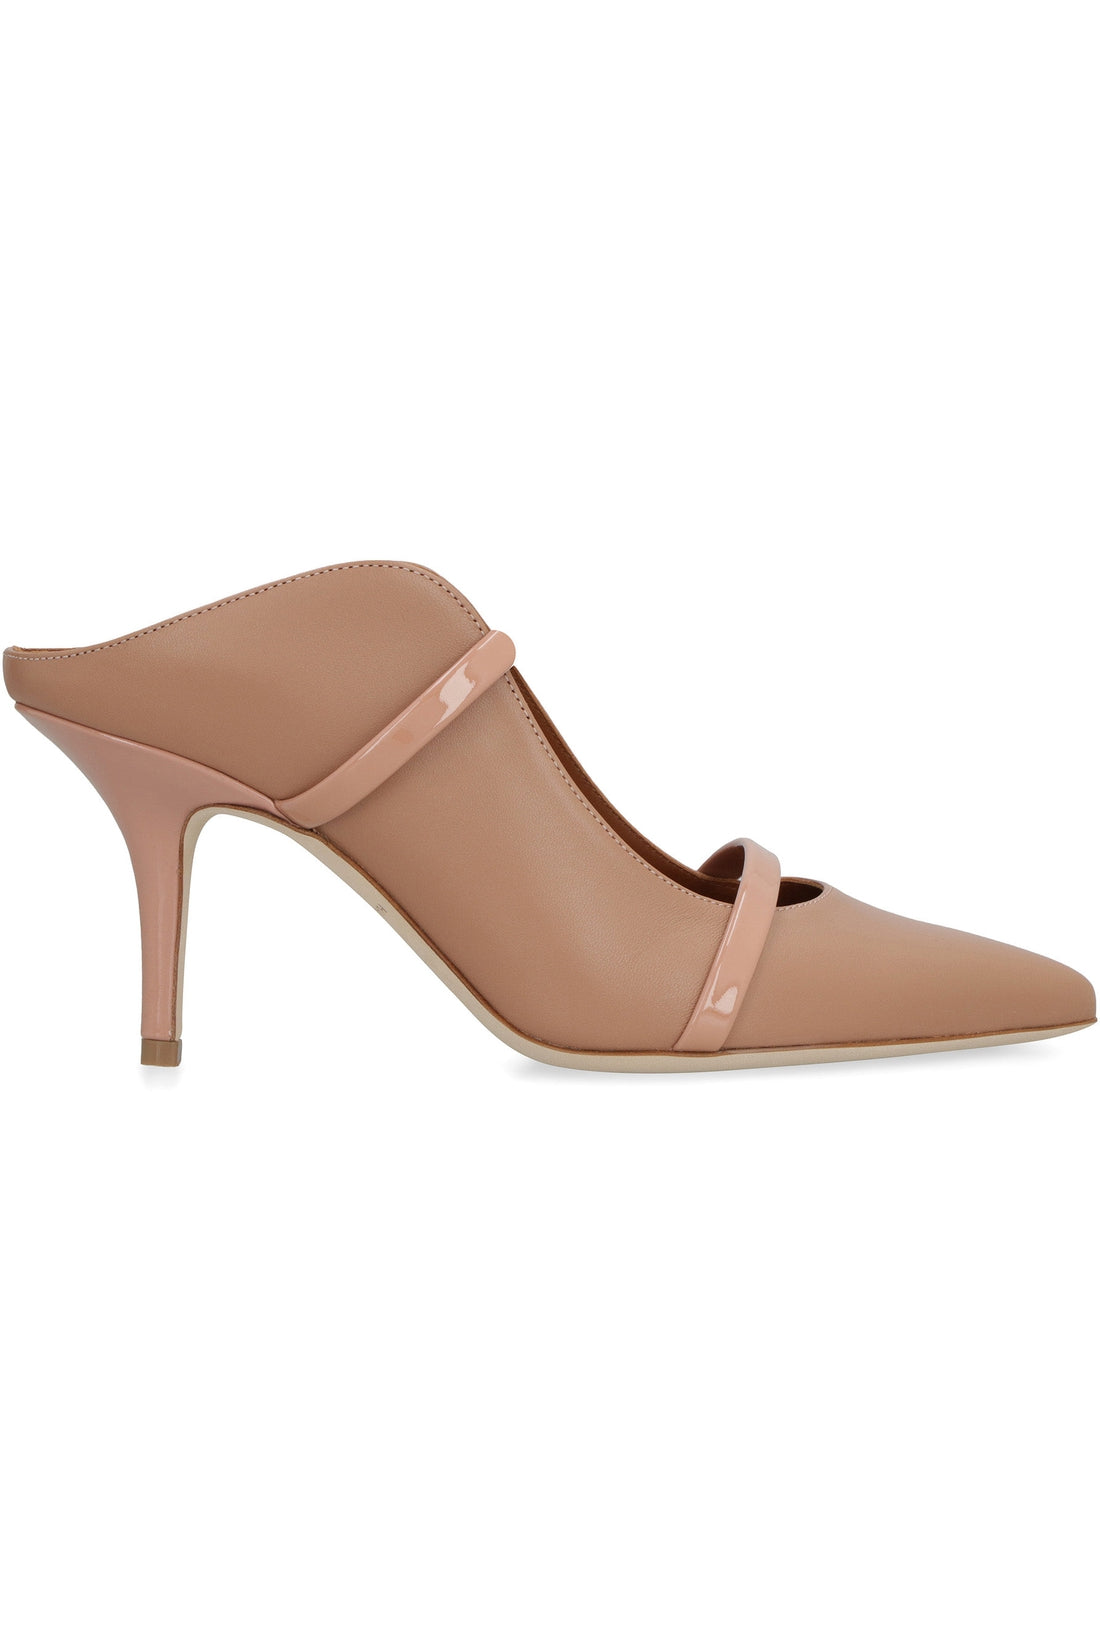 Malone Souliers-OUTLET-SALE-Maureen leather mules-ARCHIVIST